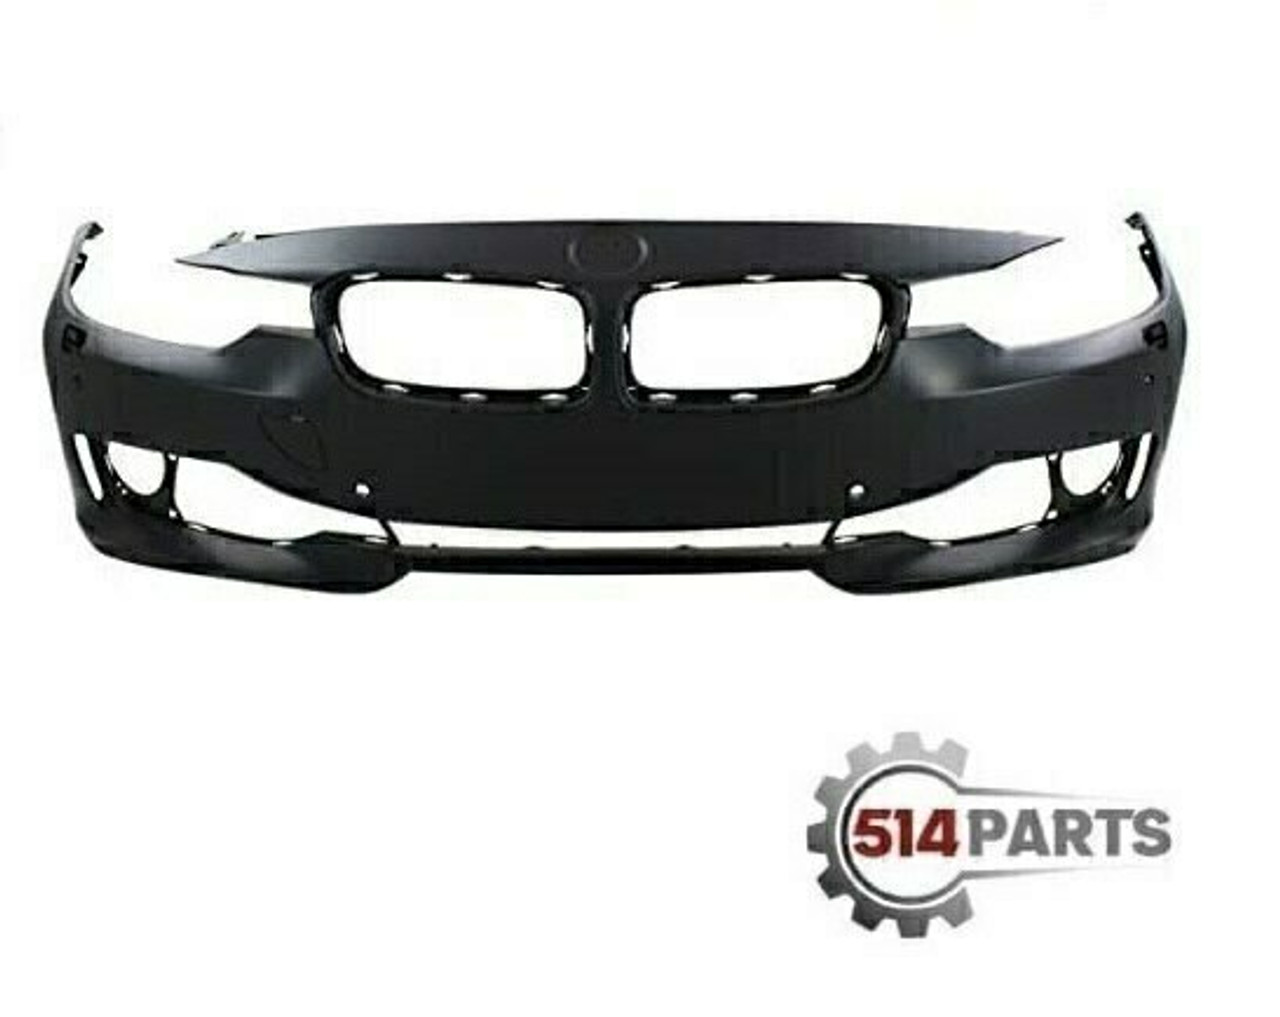 2012 - 2015 BMW 3 SERIES FRONT BUMPER WITH SENSOR WITH HEAD LIGHTS WASHER WITH CAMERA WITH PARK DISTANCE CONTROL NO MOLDING PARE-CHOC AVANT AVEC SENSOR AVEC LAVE PHARES AVEC CAMERA AVEC PARK DISTANCE CONTROL NO MOLDING